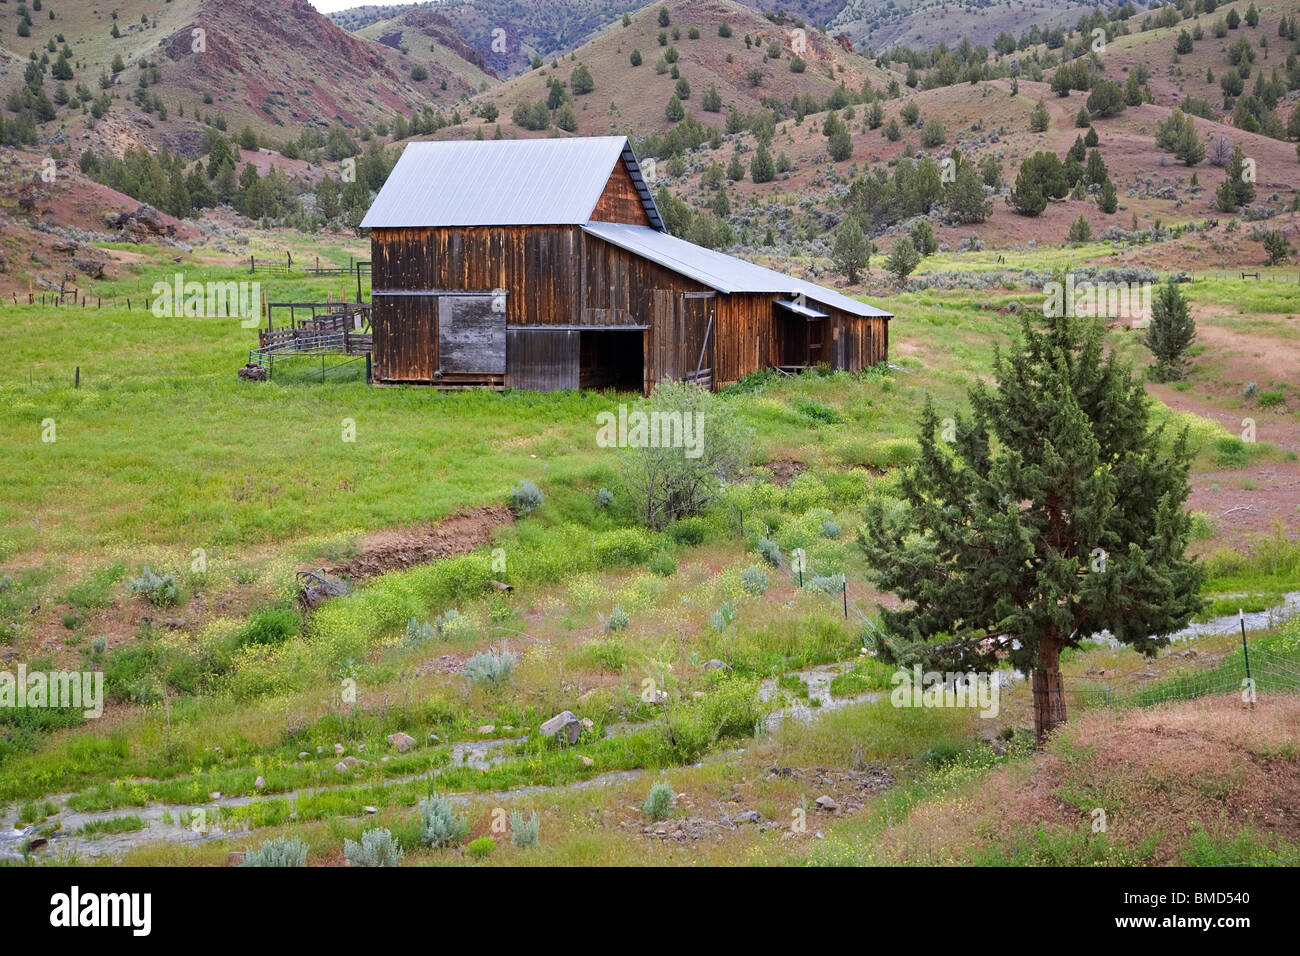 An old wooden barn on a large cattle ranch along the John Day River in central/eastern Oregon Stock Photo